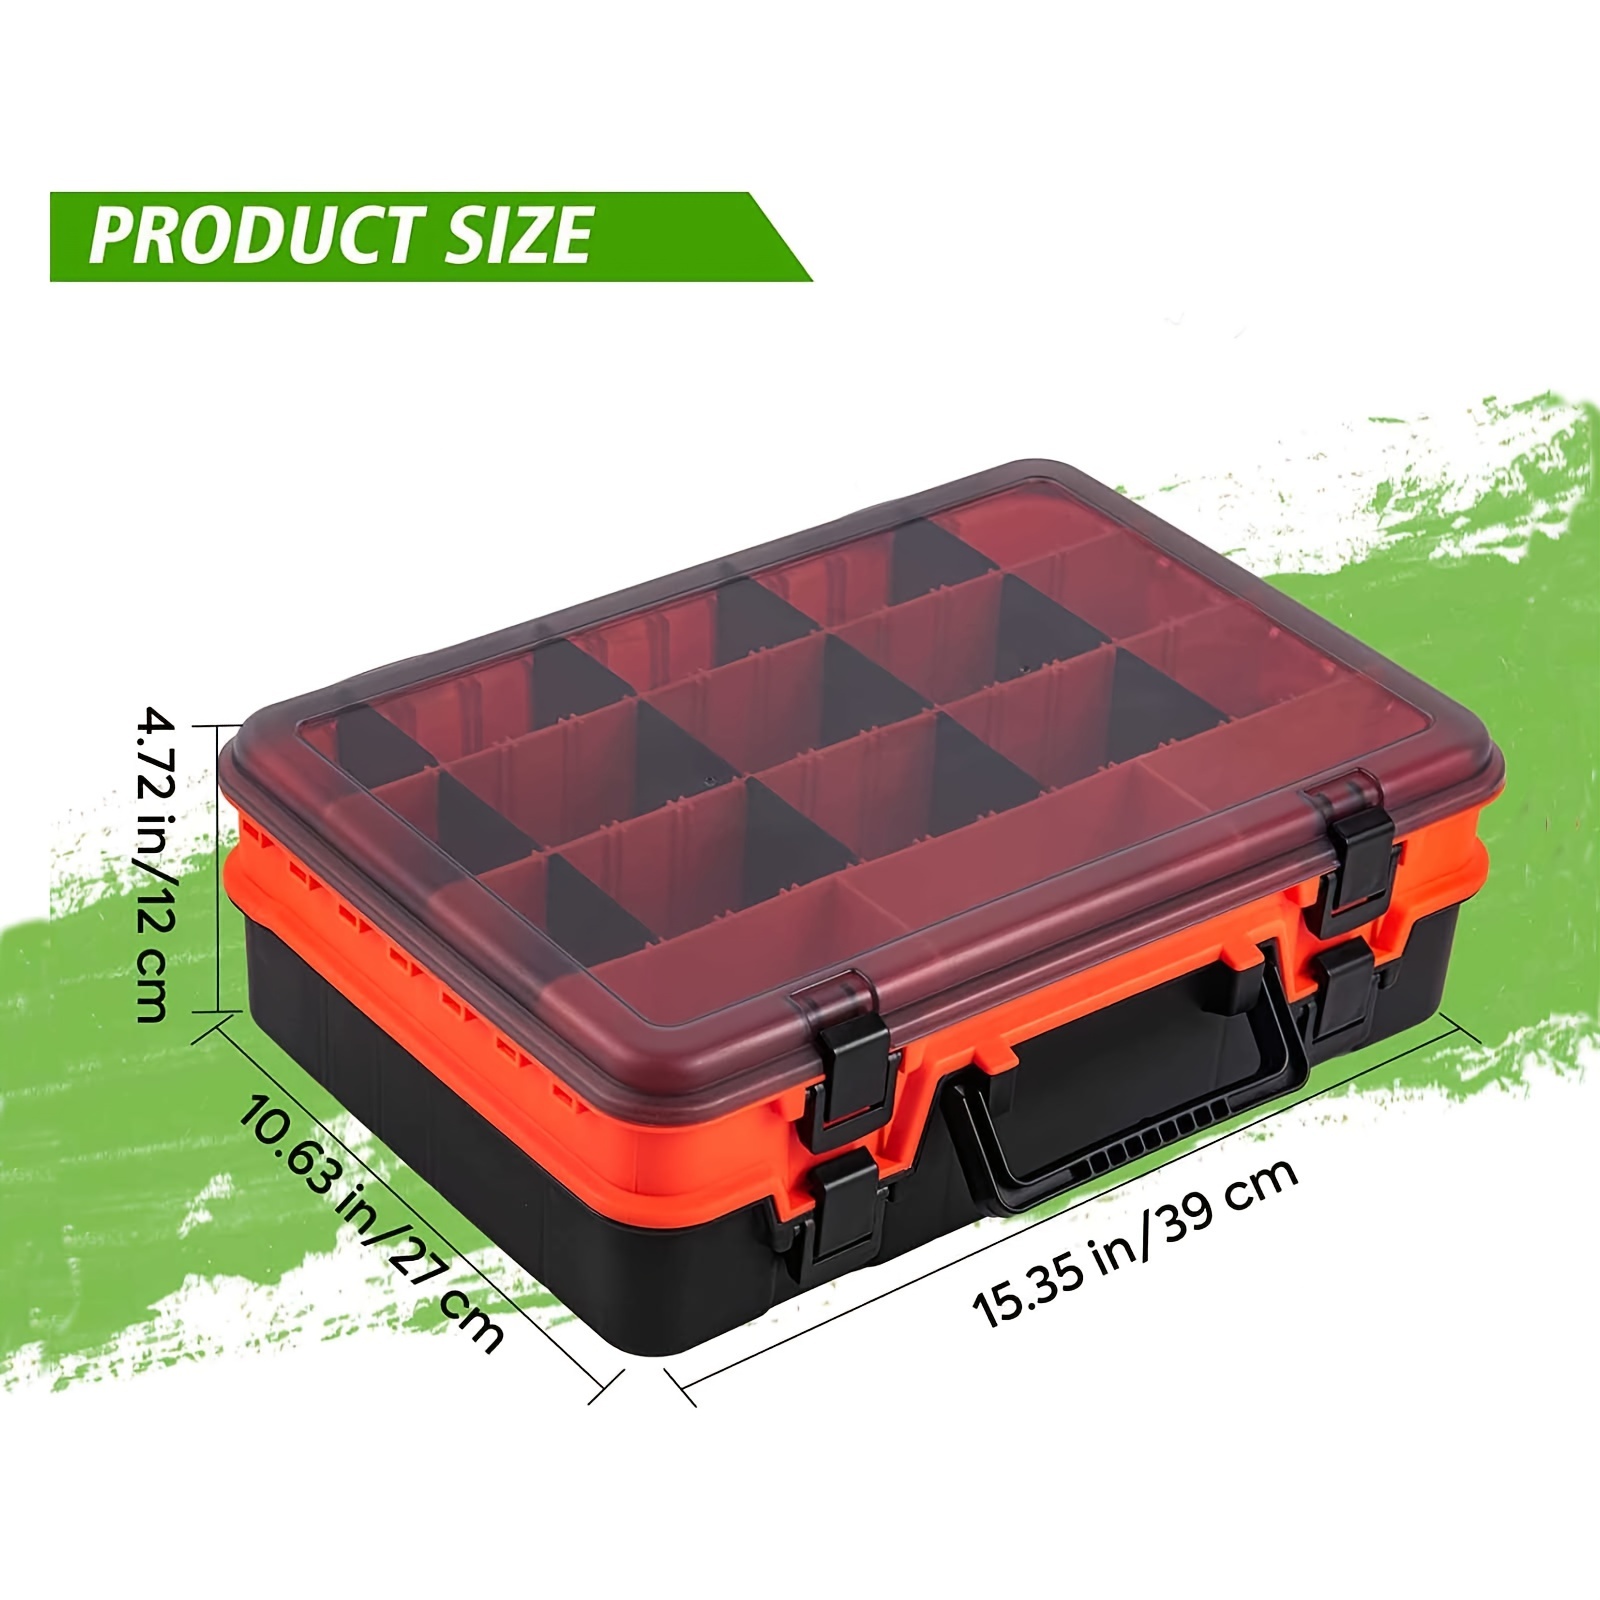 Organize Your Fishing Accessories with GOTURE's 2-Layer Tackle Box -  Adjustable Dividers & Clear Lid!